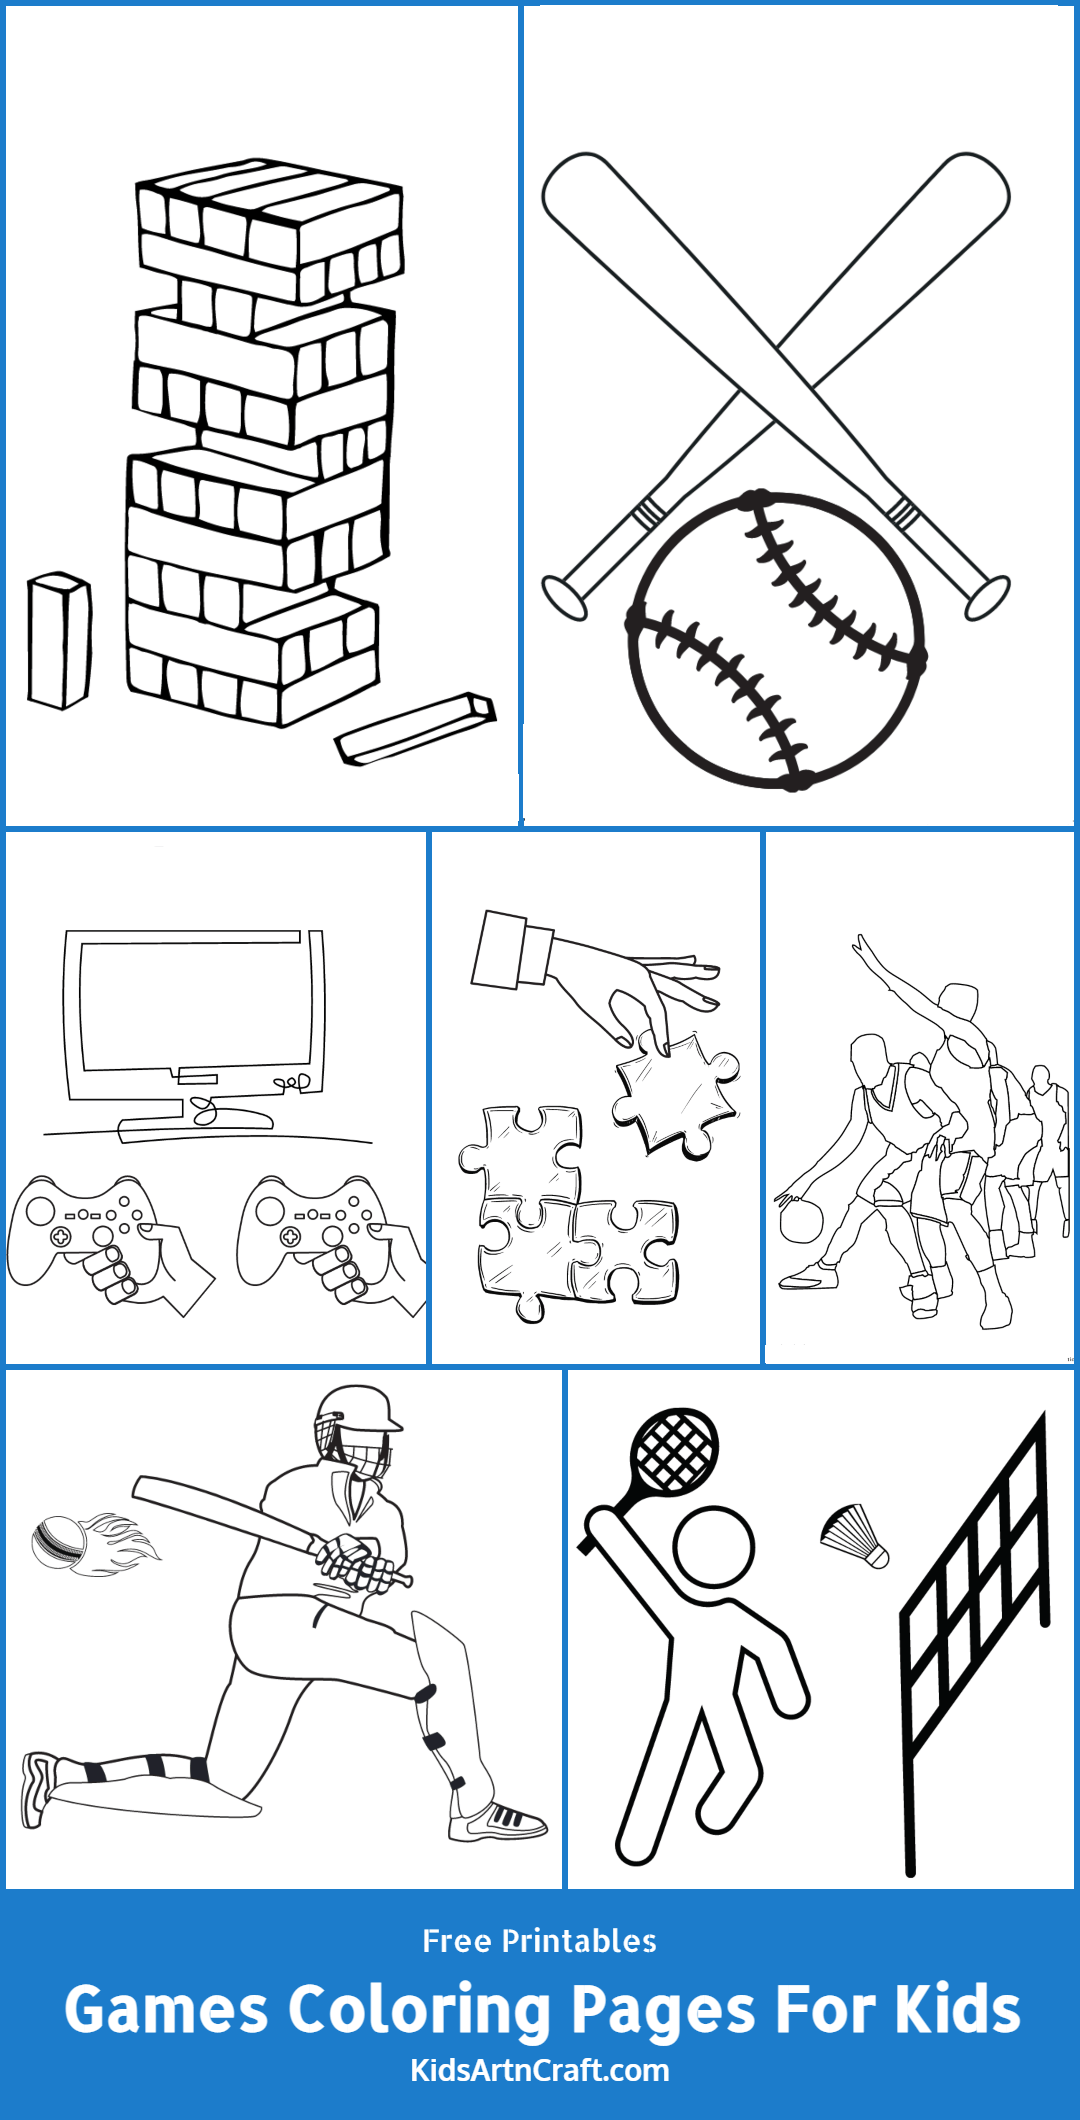 Games Coloring Pages For Kids – Free Printables